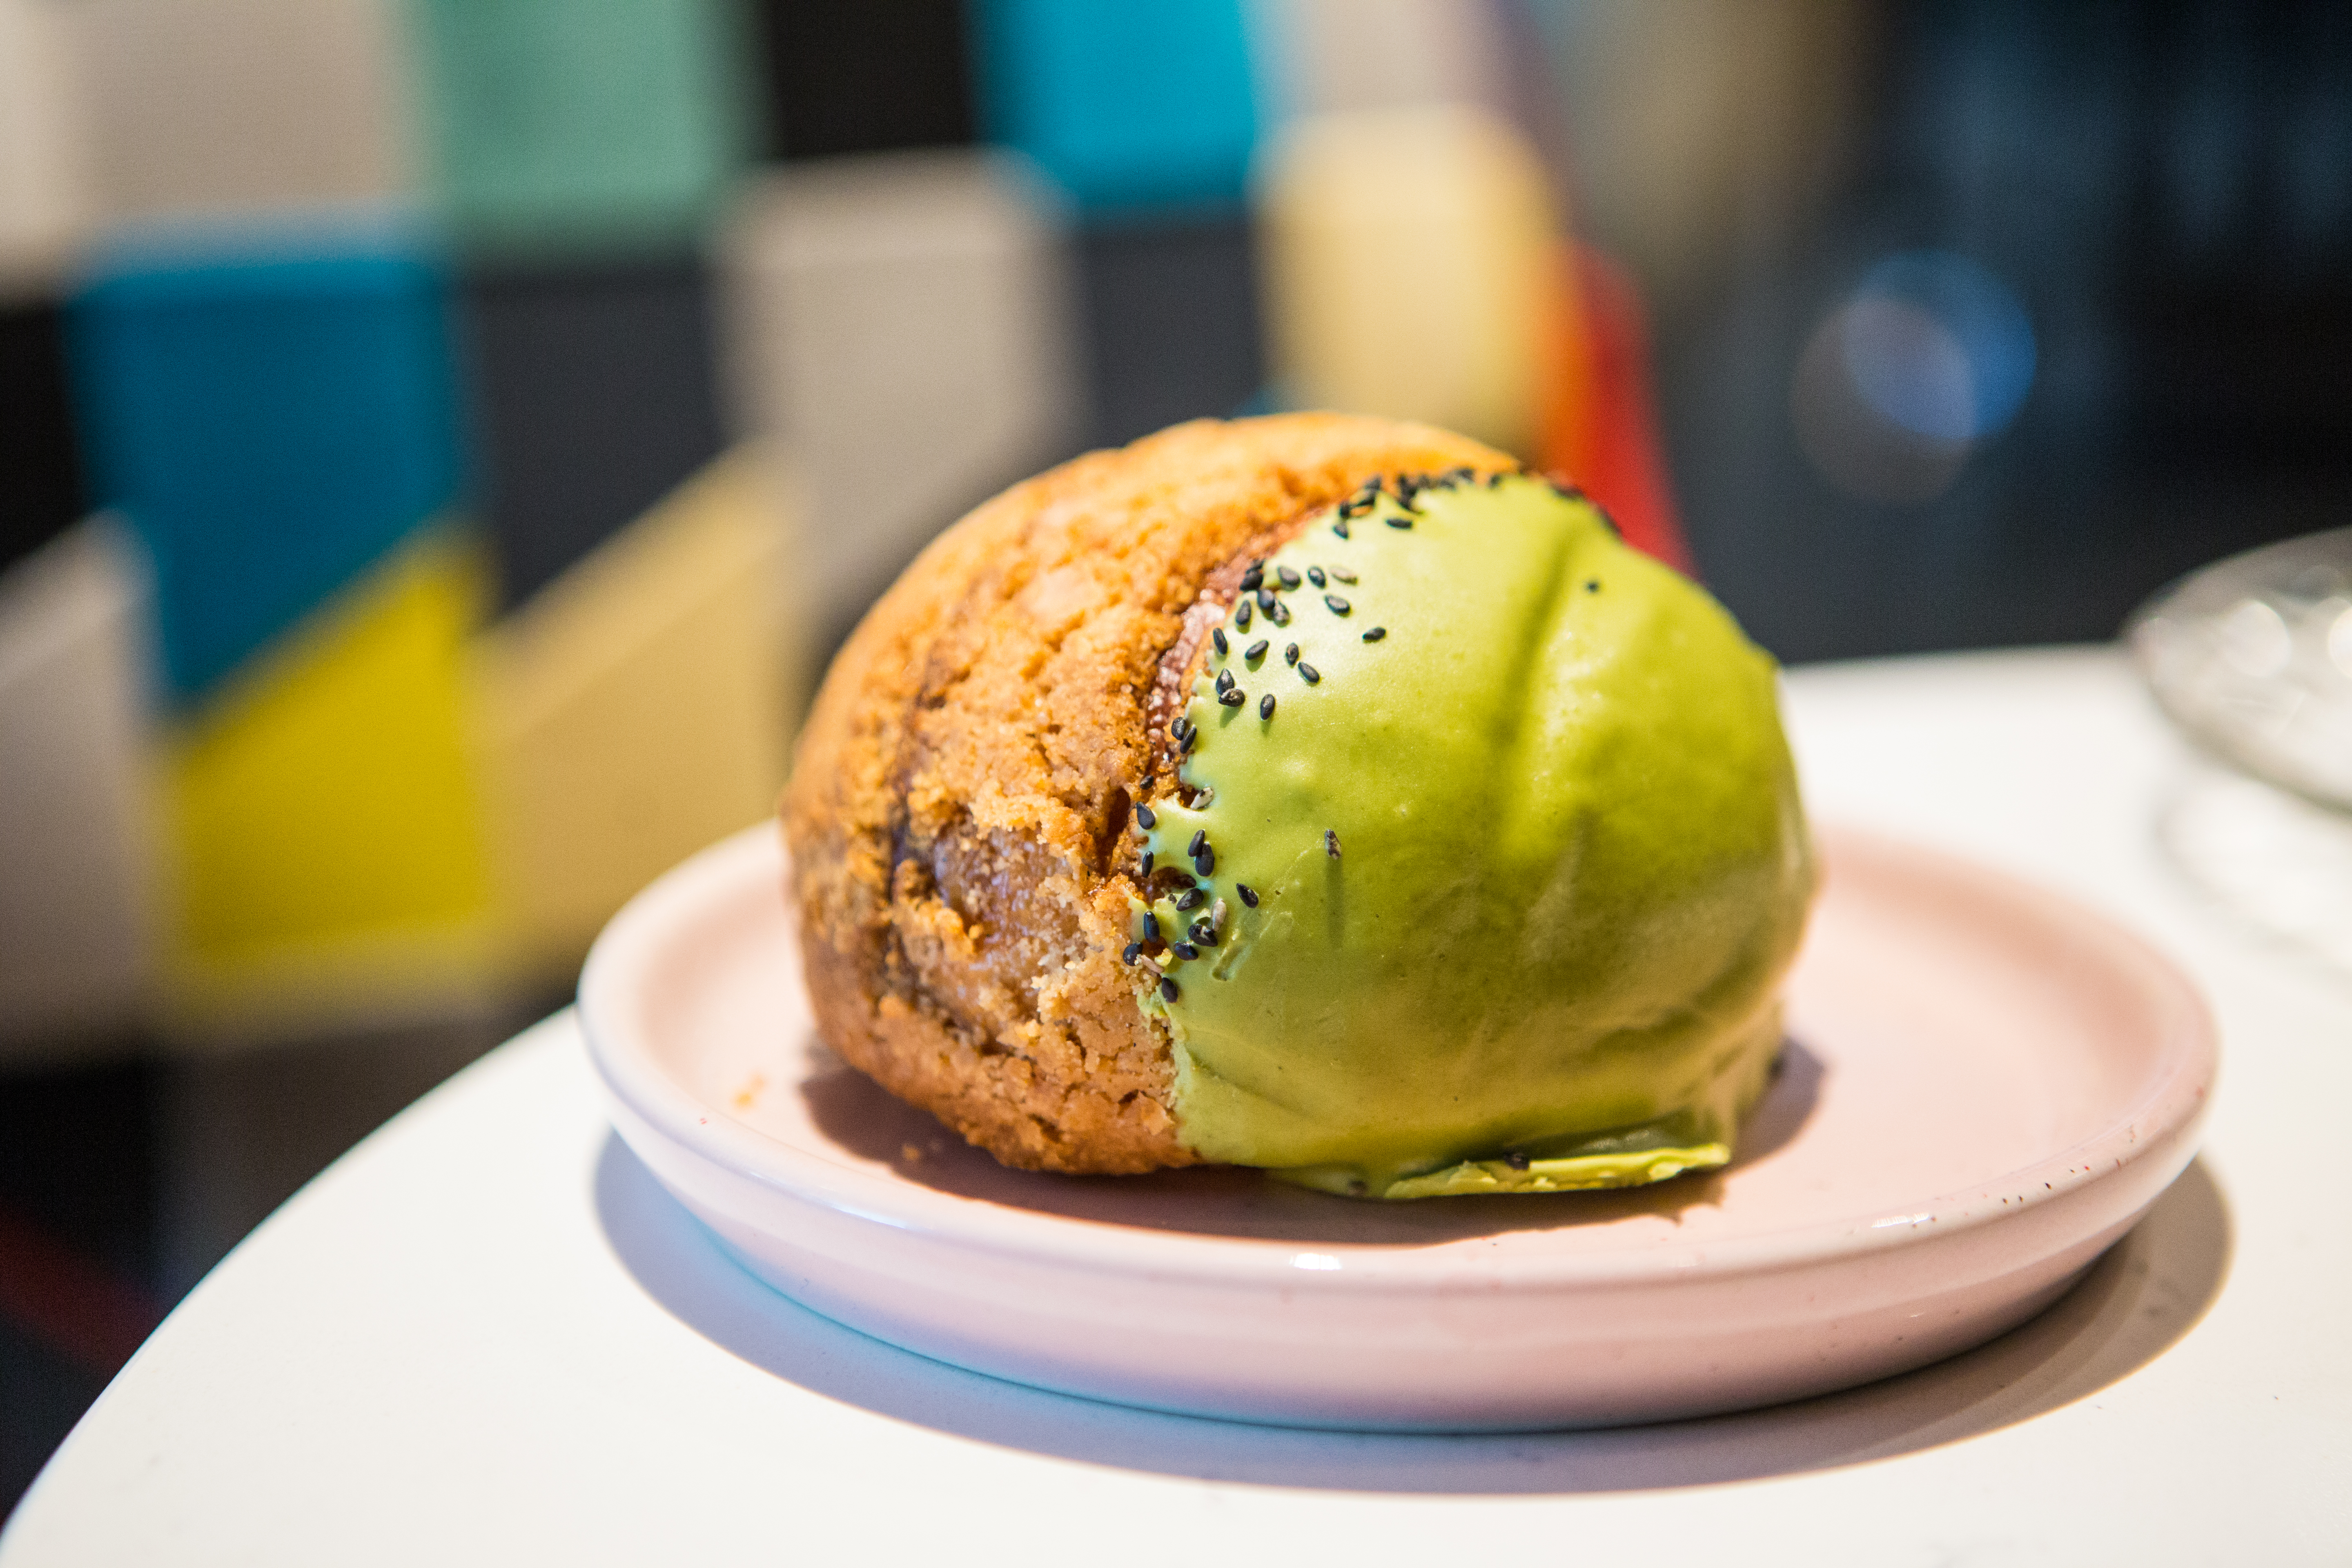 The matcha concha from Alfred